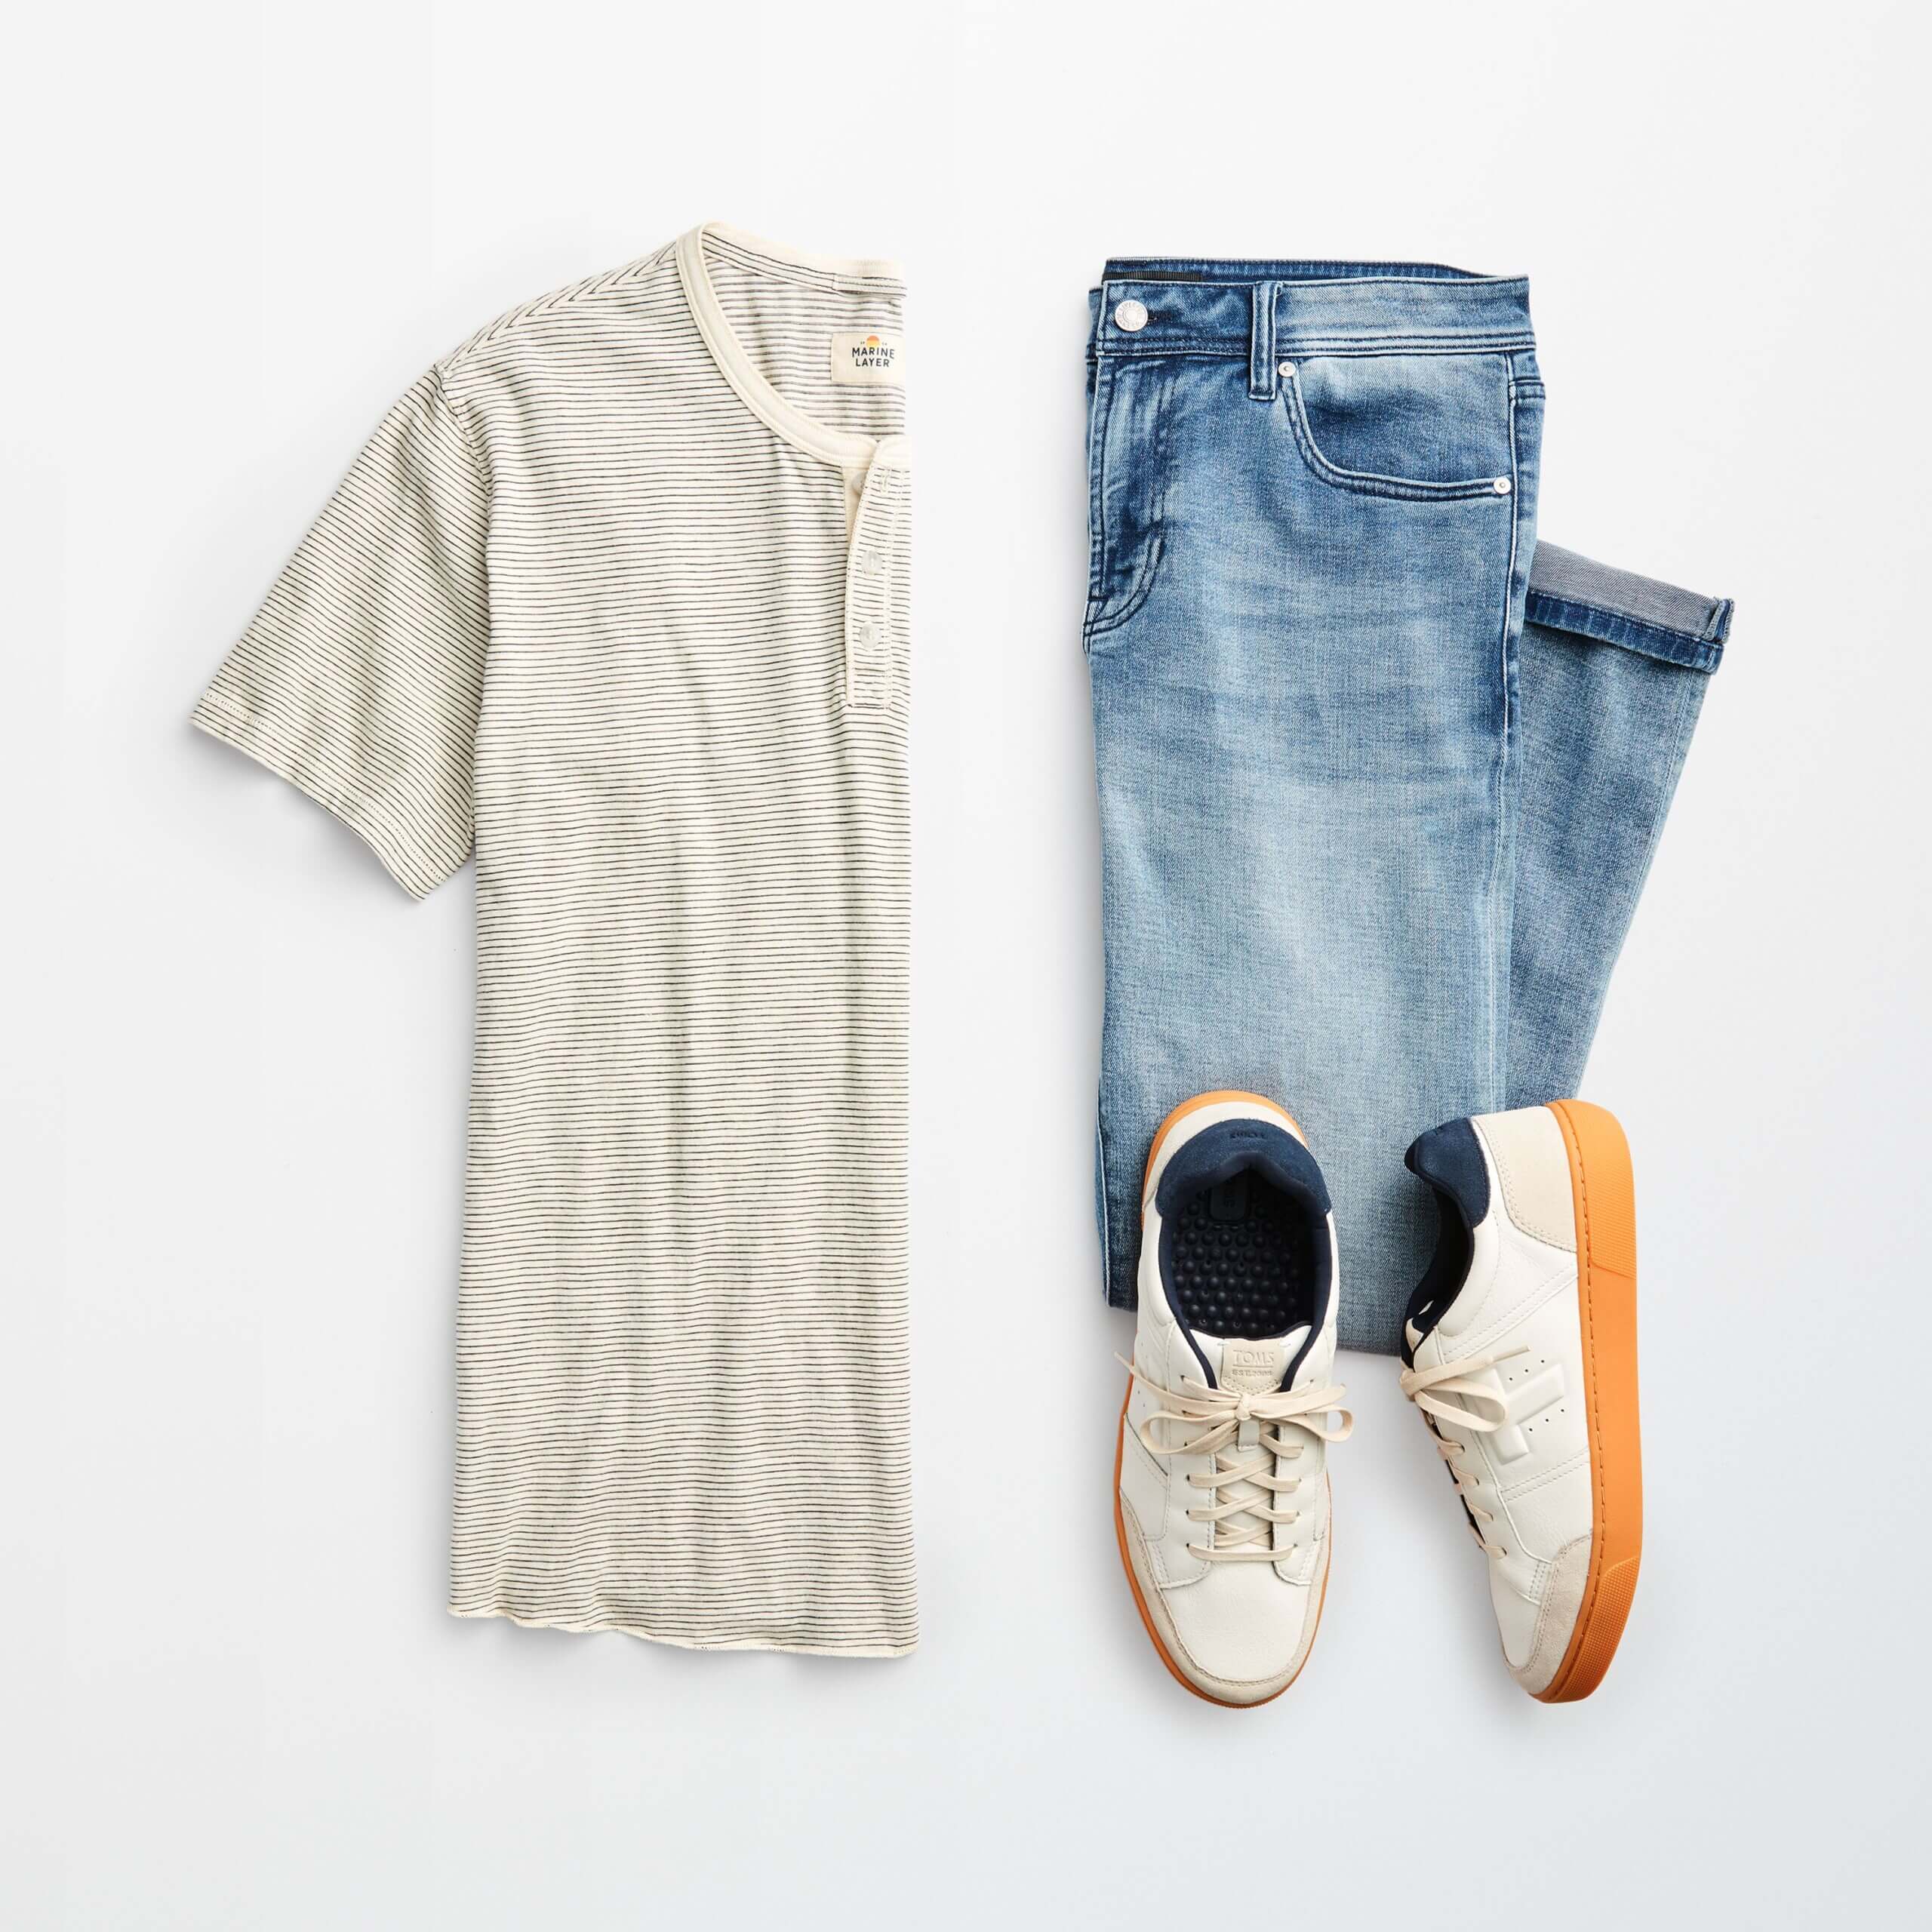 Stitch Fix Men’s outfit laydown featuring white striped henley shirt, blue jeans and white sneakers.